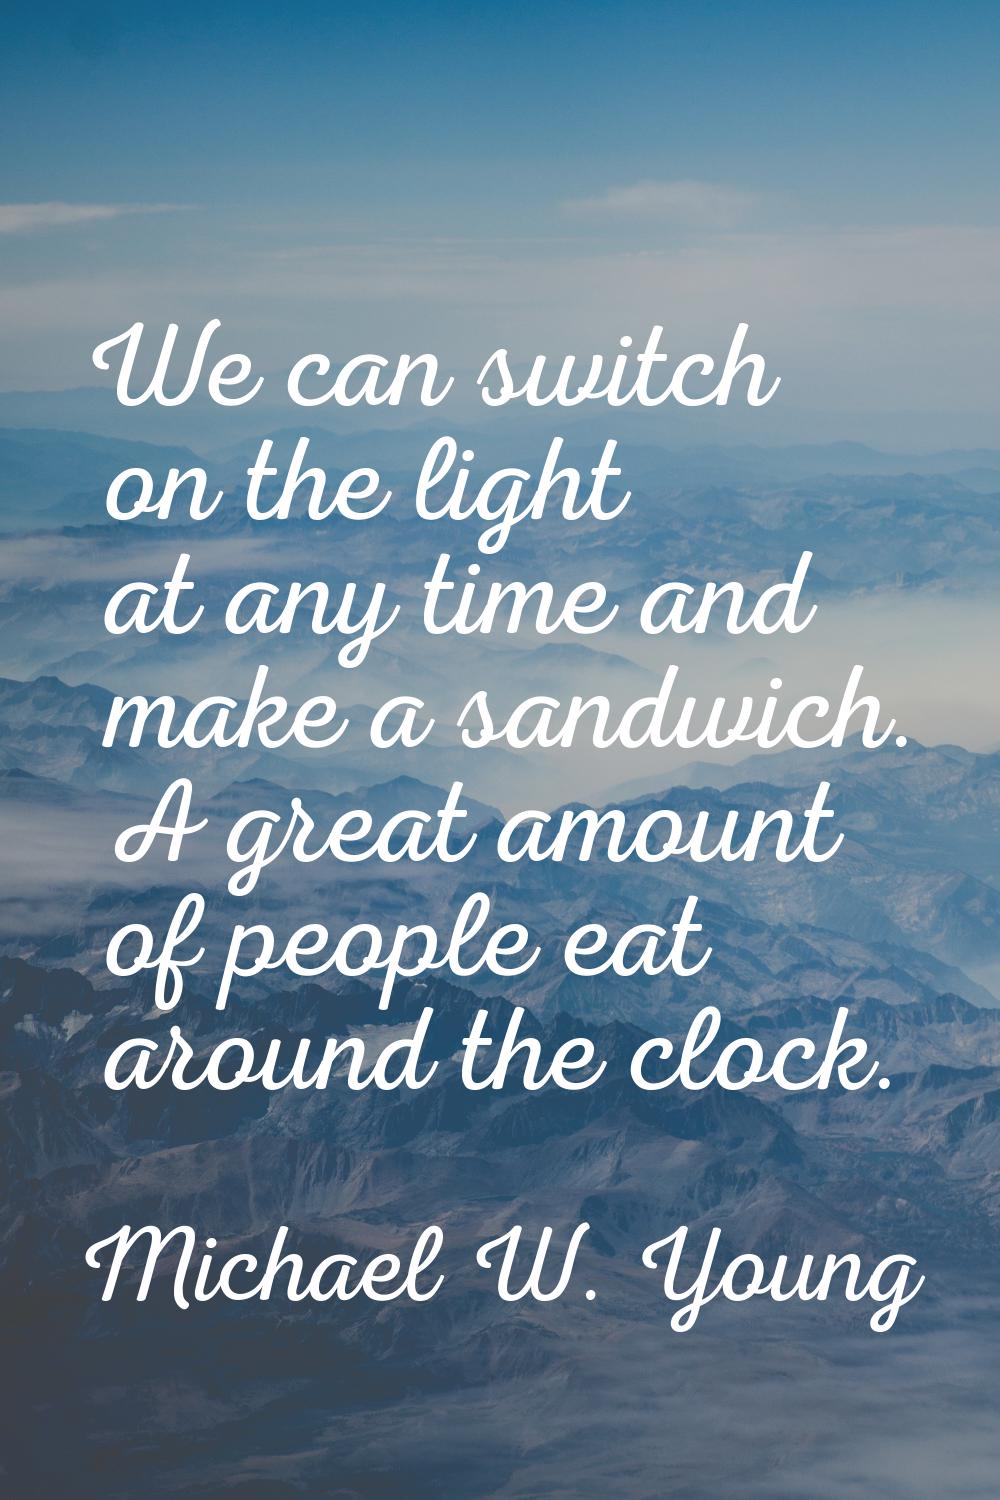 We can switch on the light at any time and make a sandwich. A great amount of people eat around the